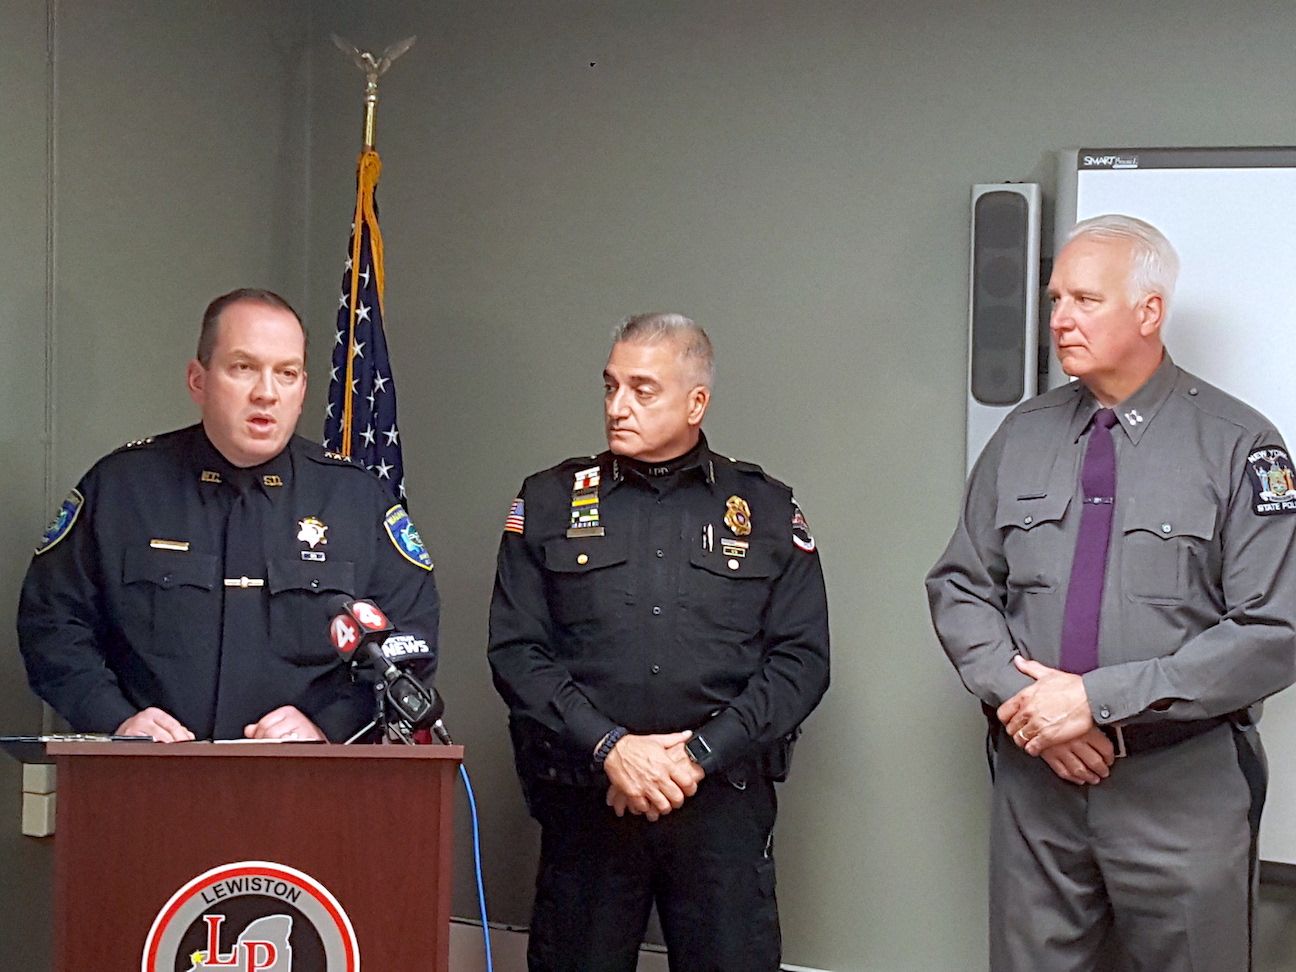 From left, Acting Niagara County Sheriff Michael Filicetti discusses the shooting incident as Lewiston Police Chief Previte and New York State Police Capt. David B. Forsyth Jr. look on. (Photo by Terry Duffy.